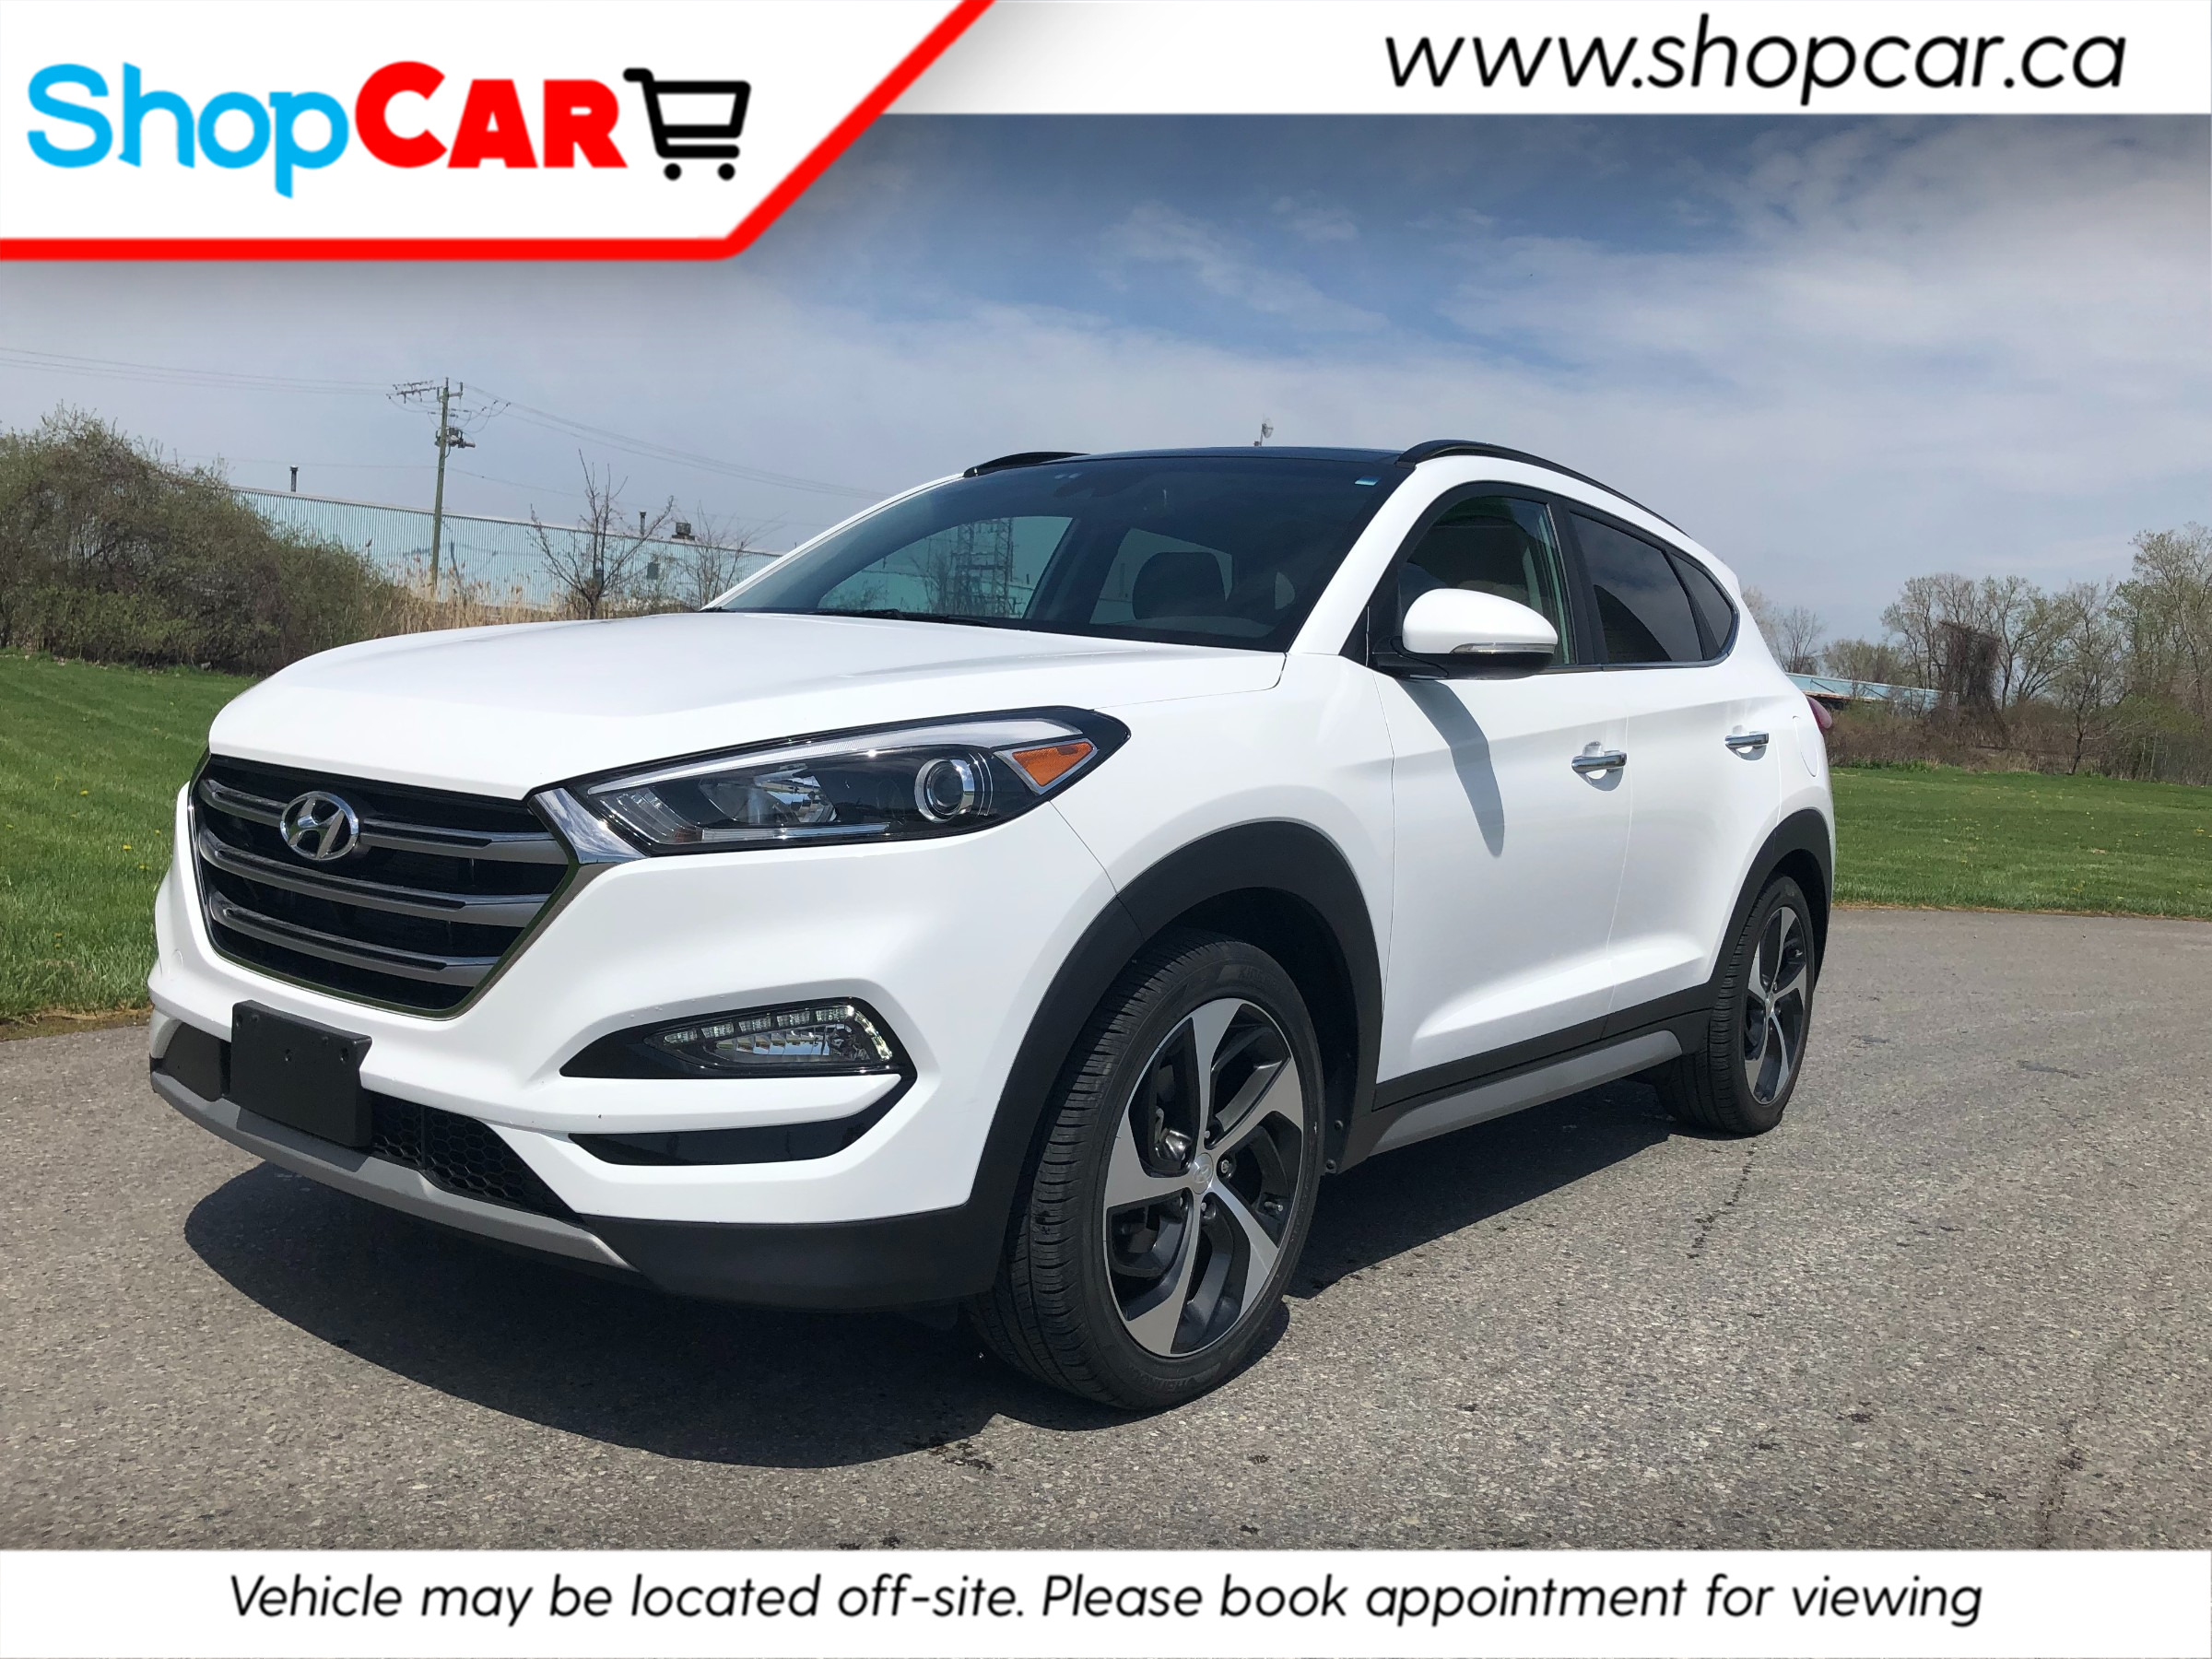 2017 Hyundai Tucson New Arrival | Low KMs | Clean CarFax | Loaded